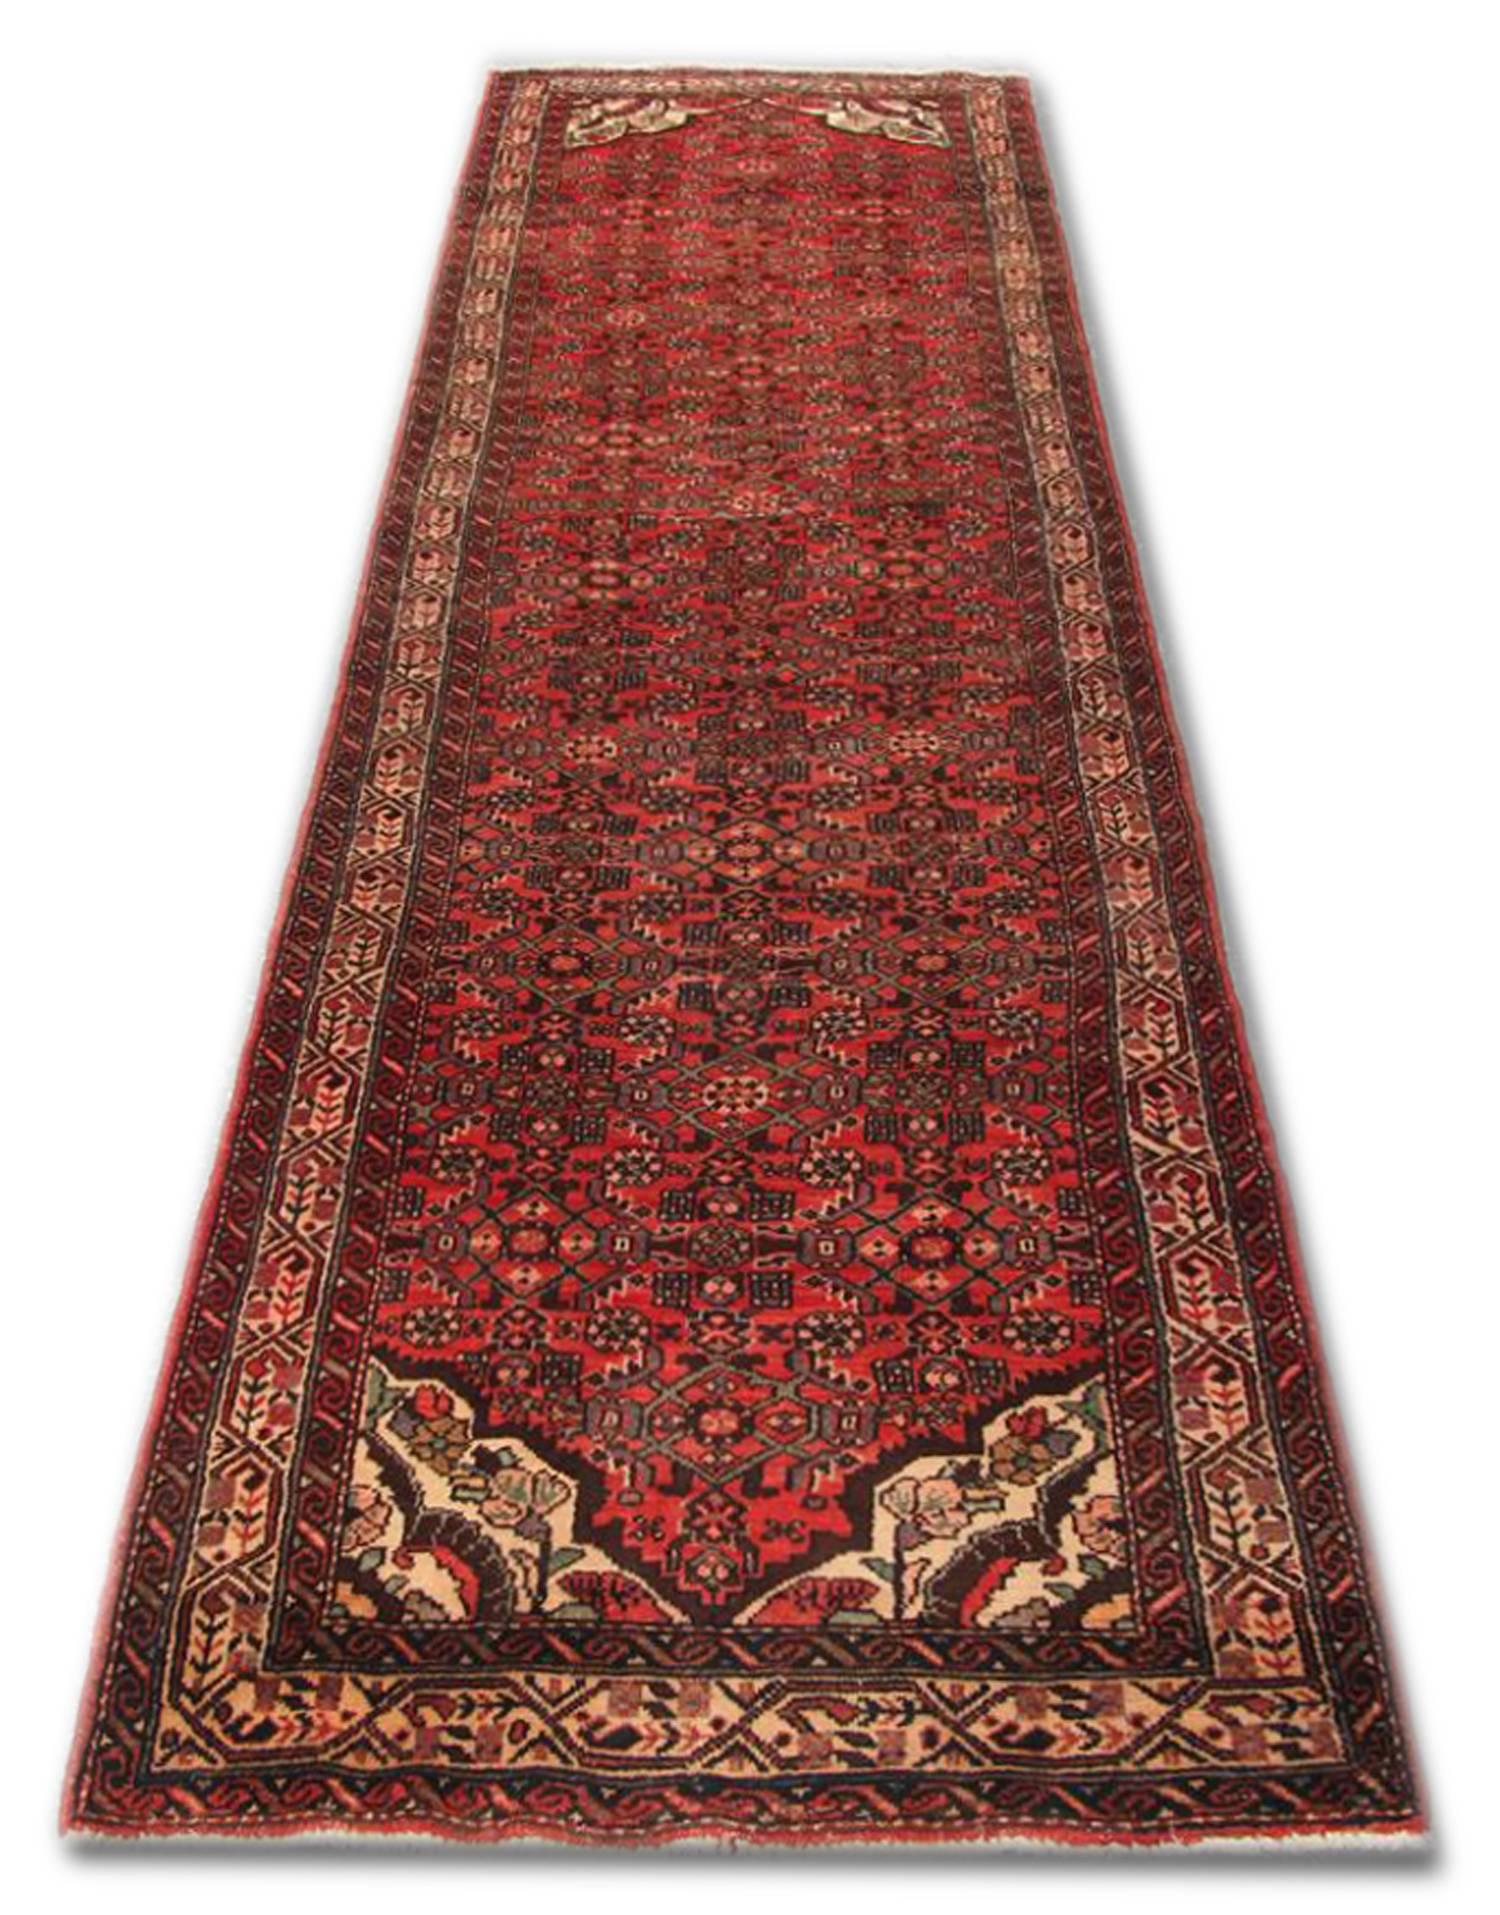 This wool rug is a fine example of traditional Runner Rugs from 1950. Featuring a red background that has been intricately woven with a symmetrical geometric pattern in contrasting colours of grey-brown and ivory. 
This rug would make a perfect